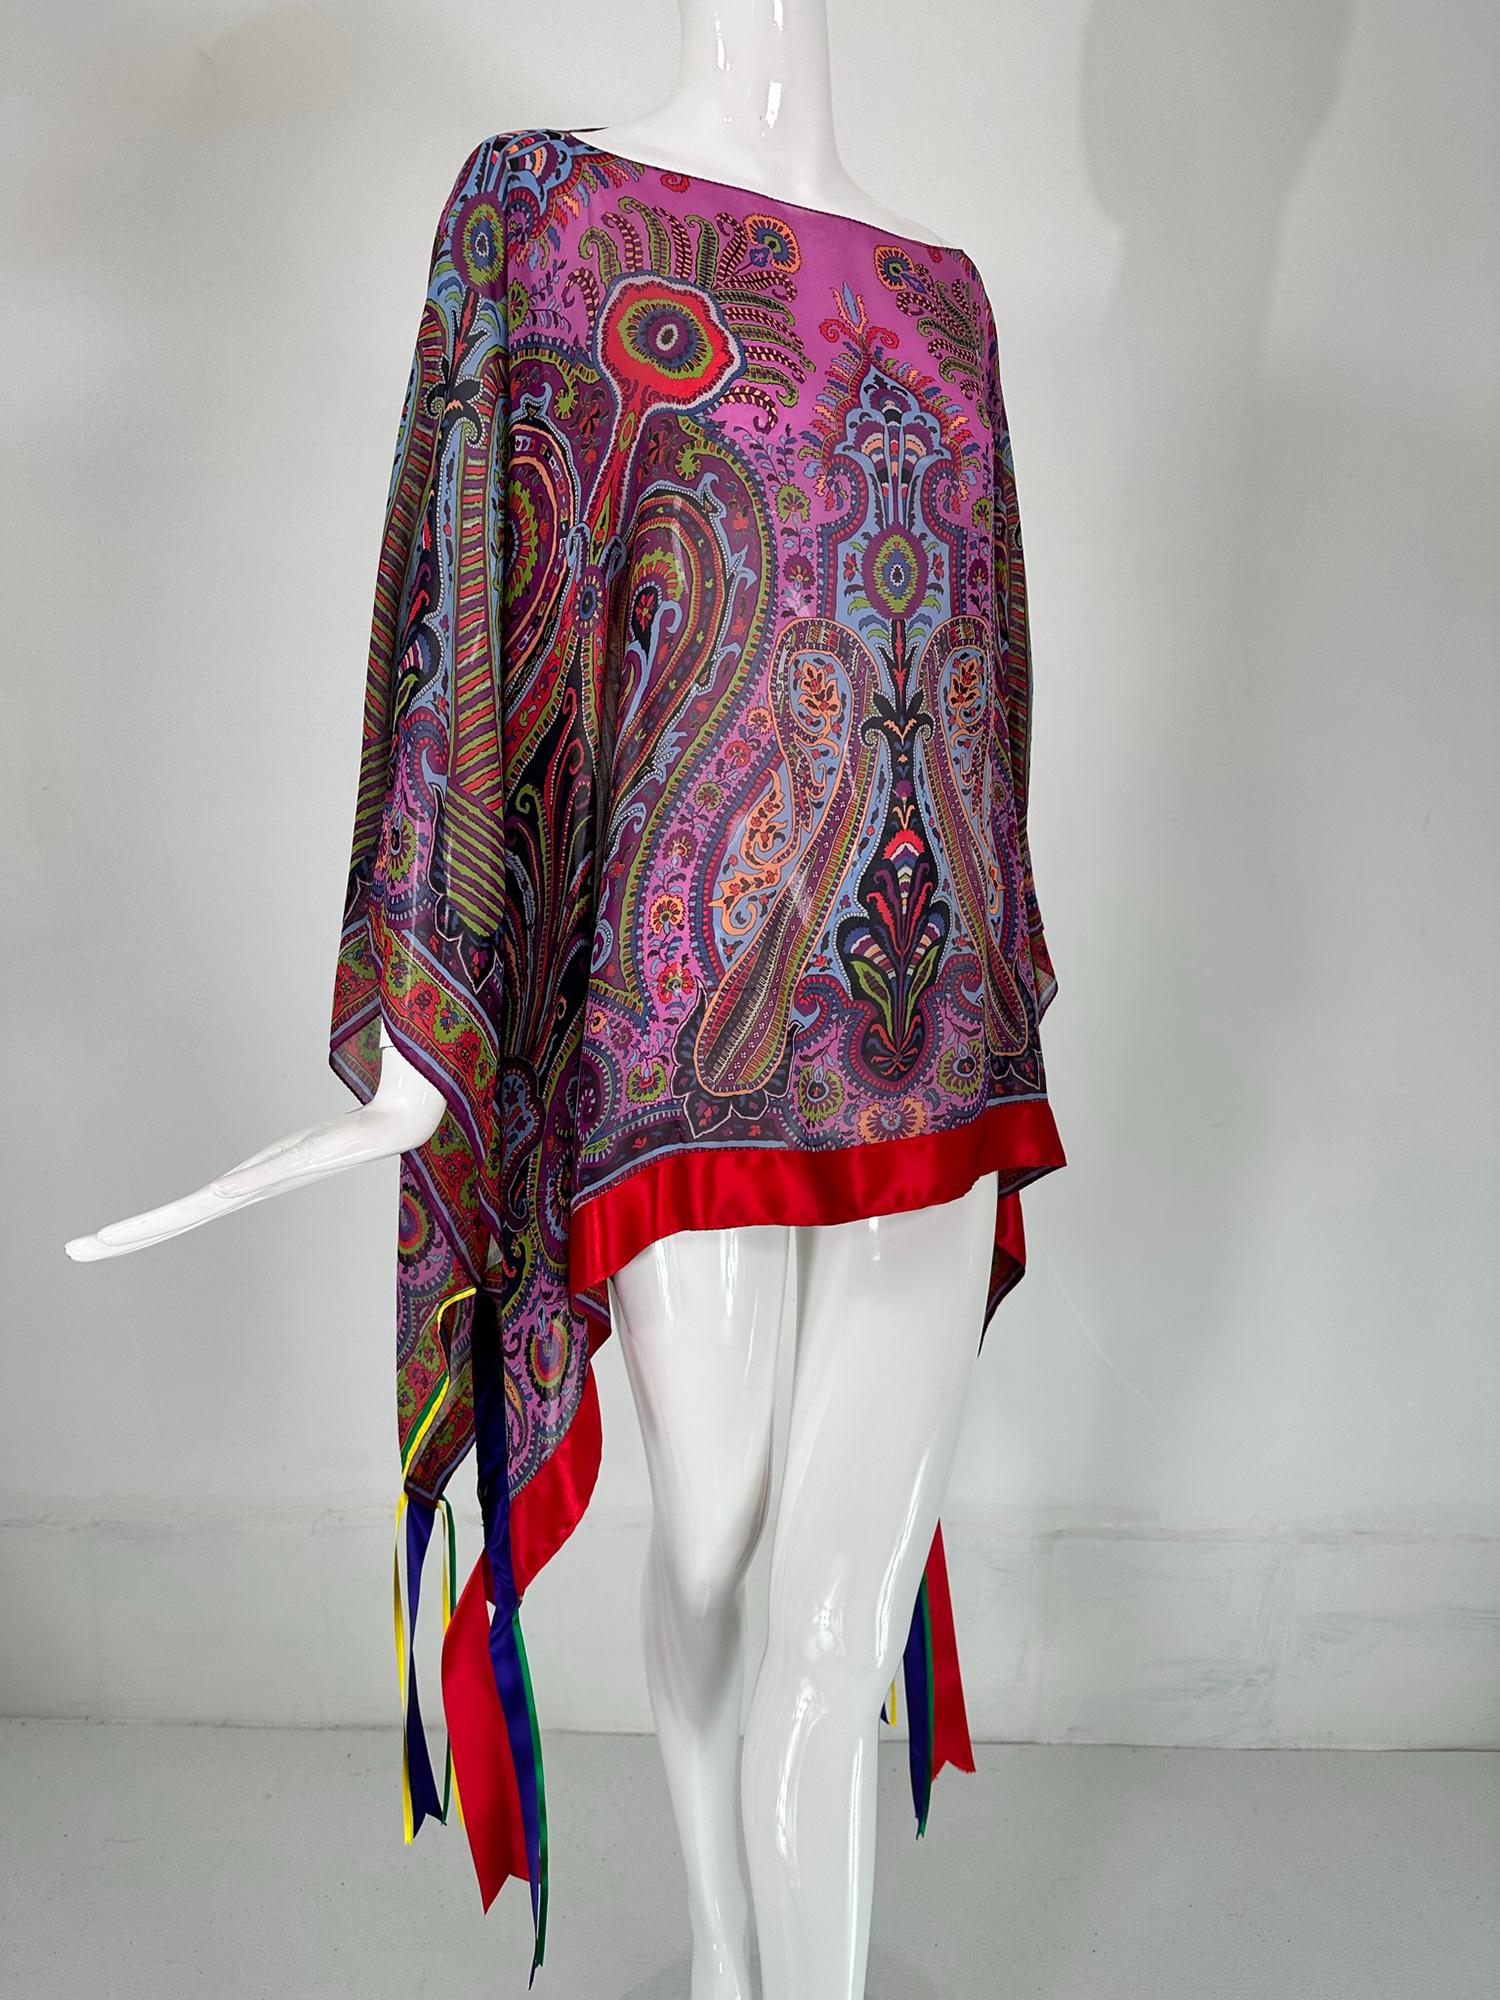 Etro silk paisley ribbon trimmed chiffon poncho. Beautiful bright silk paisley pull on poncho is trimmed in red, yellow & purple silk ribbons. Sheer silk chiffon poncho, made from a large Etro scarf/shawl with a finished neck opening and applied